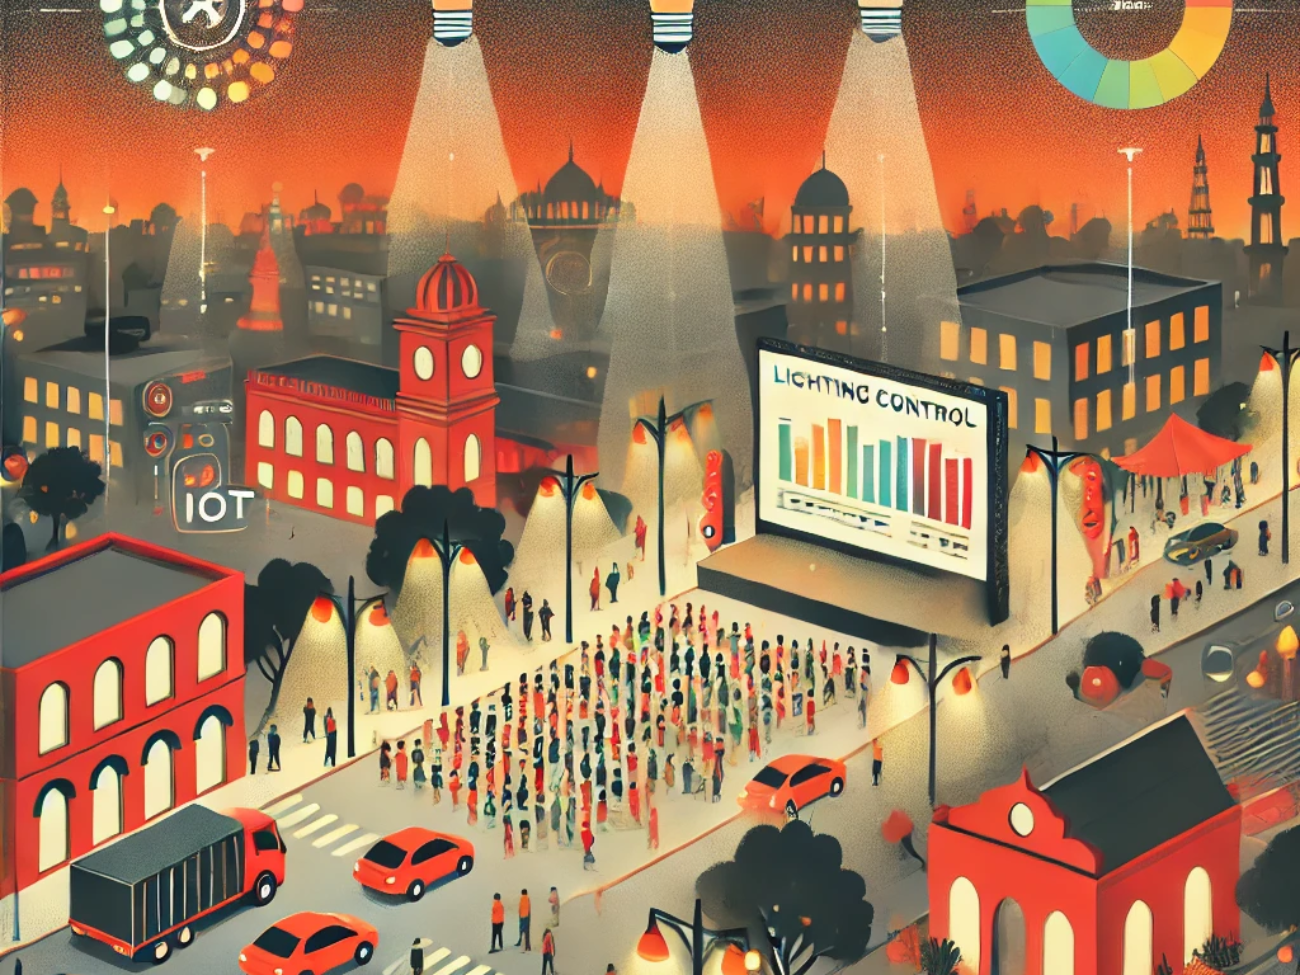 DALL·E 2024-06-19 14.41.04 - An illustration depicting event-based lighting control in a smart city setting in India. The image should use muted red, muted orange, and muted yello